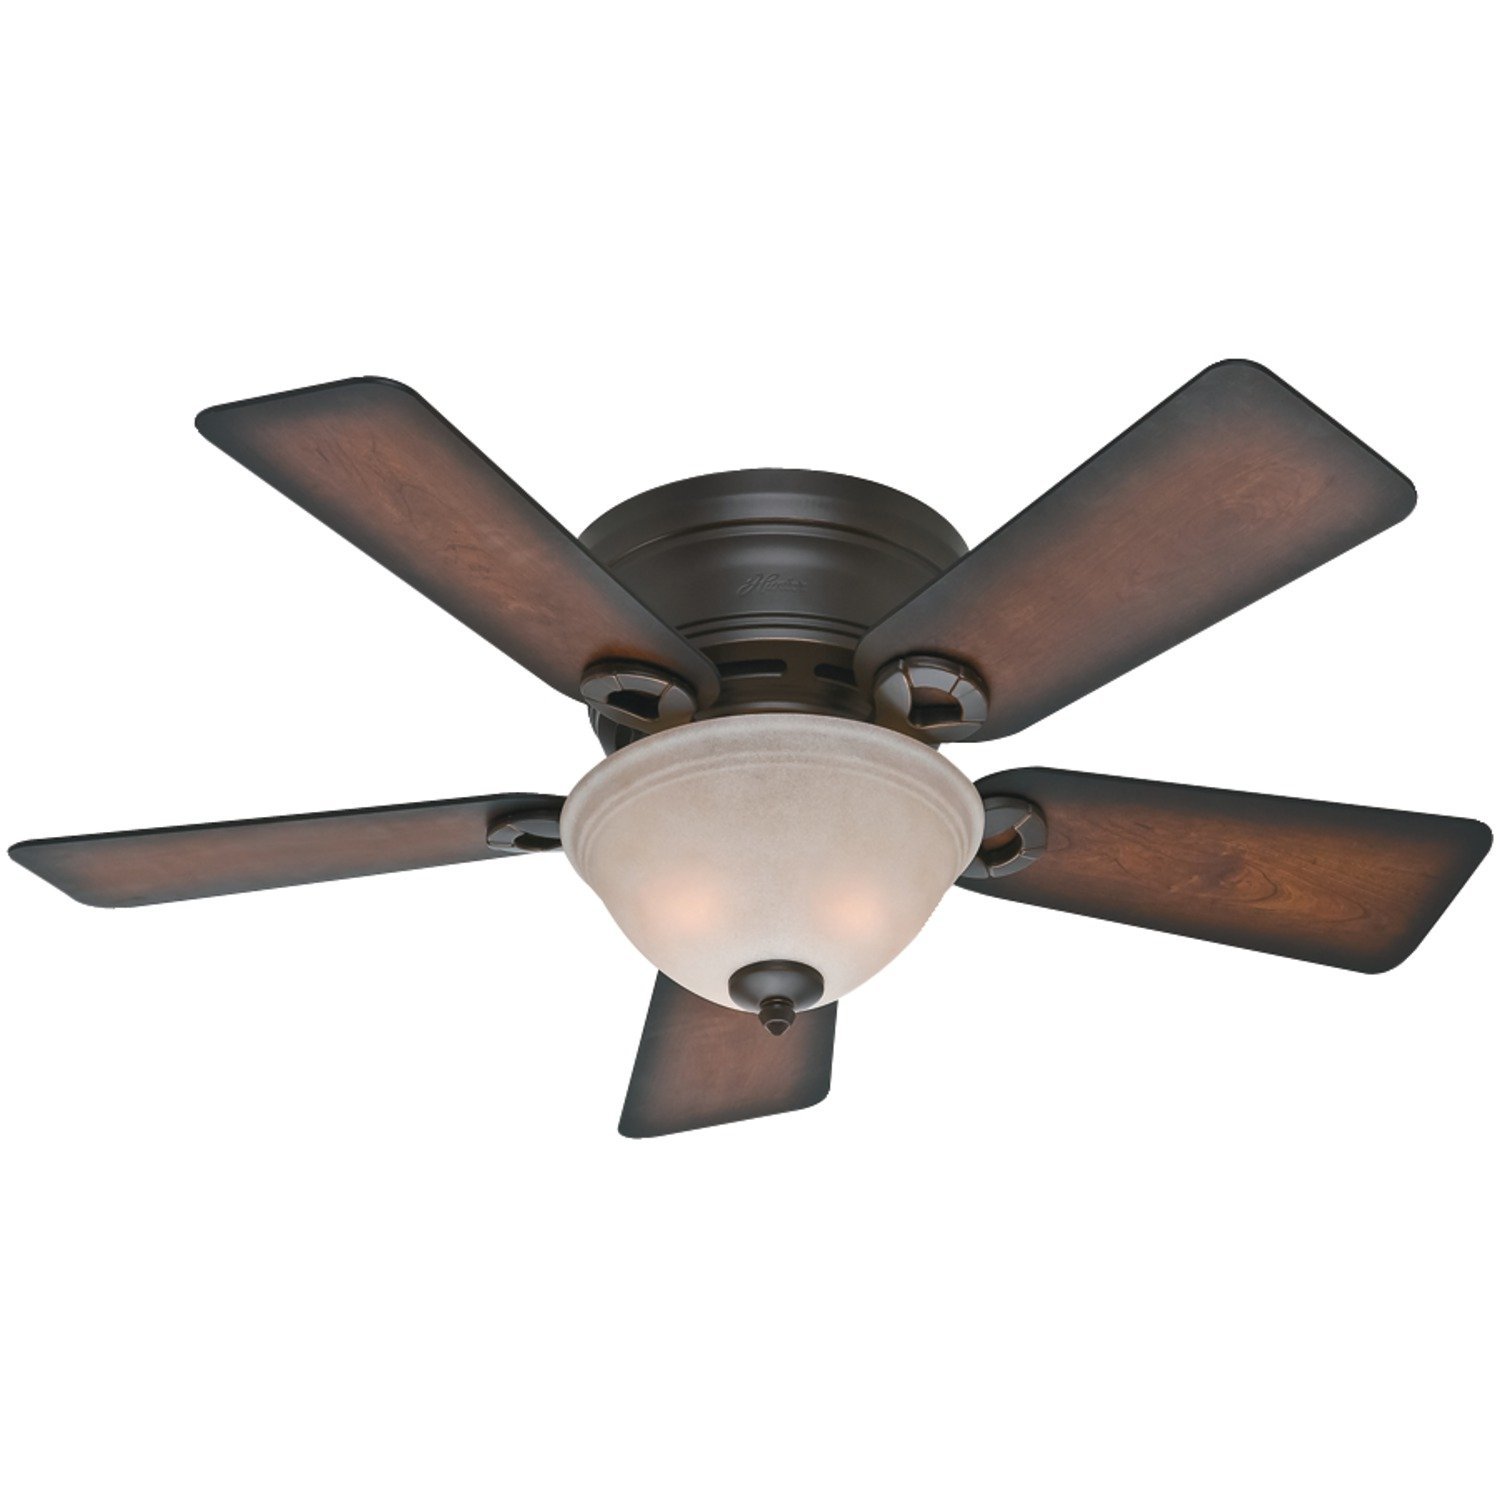 Hunter Fan Company 51023 Conroy 42-Inch Onyx Bengal Ceiling Fan with Five Burnished Mahogany Blades and a Light Kit